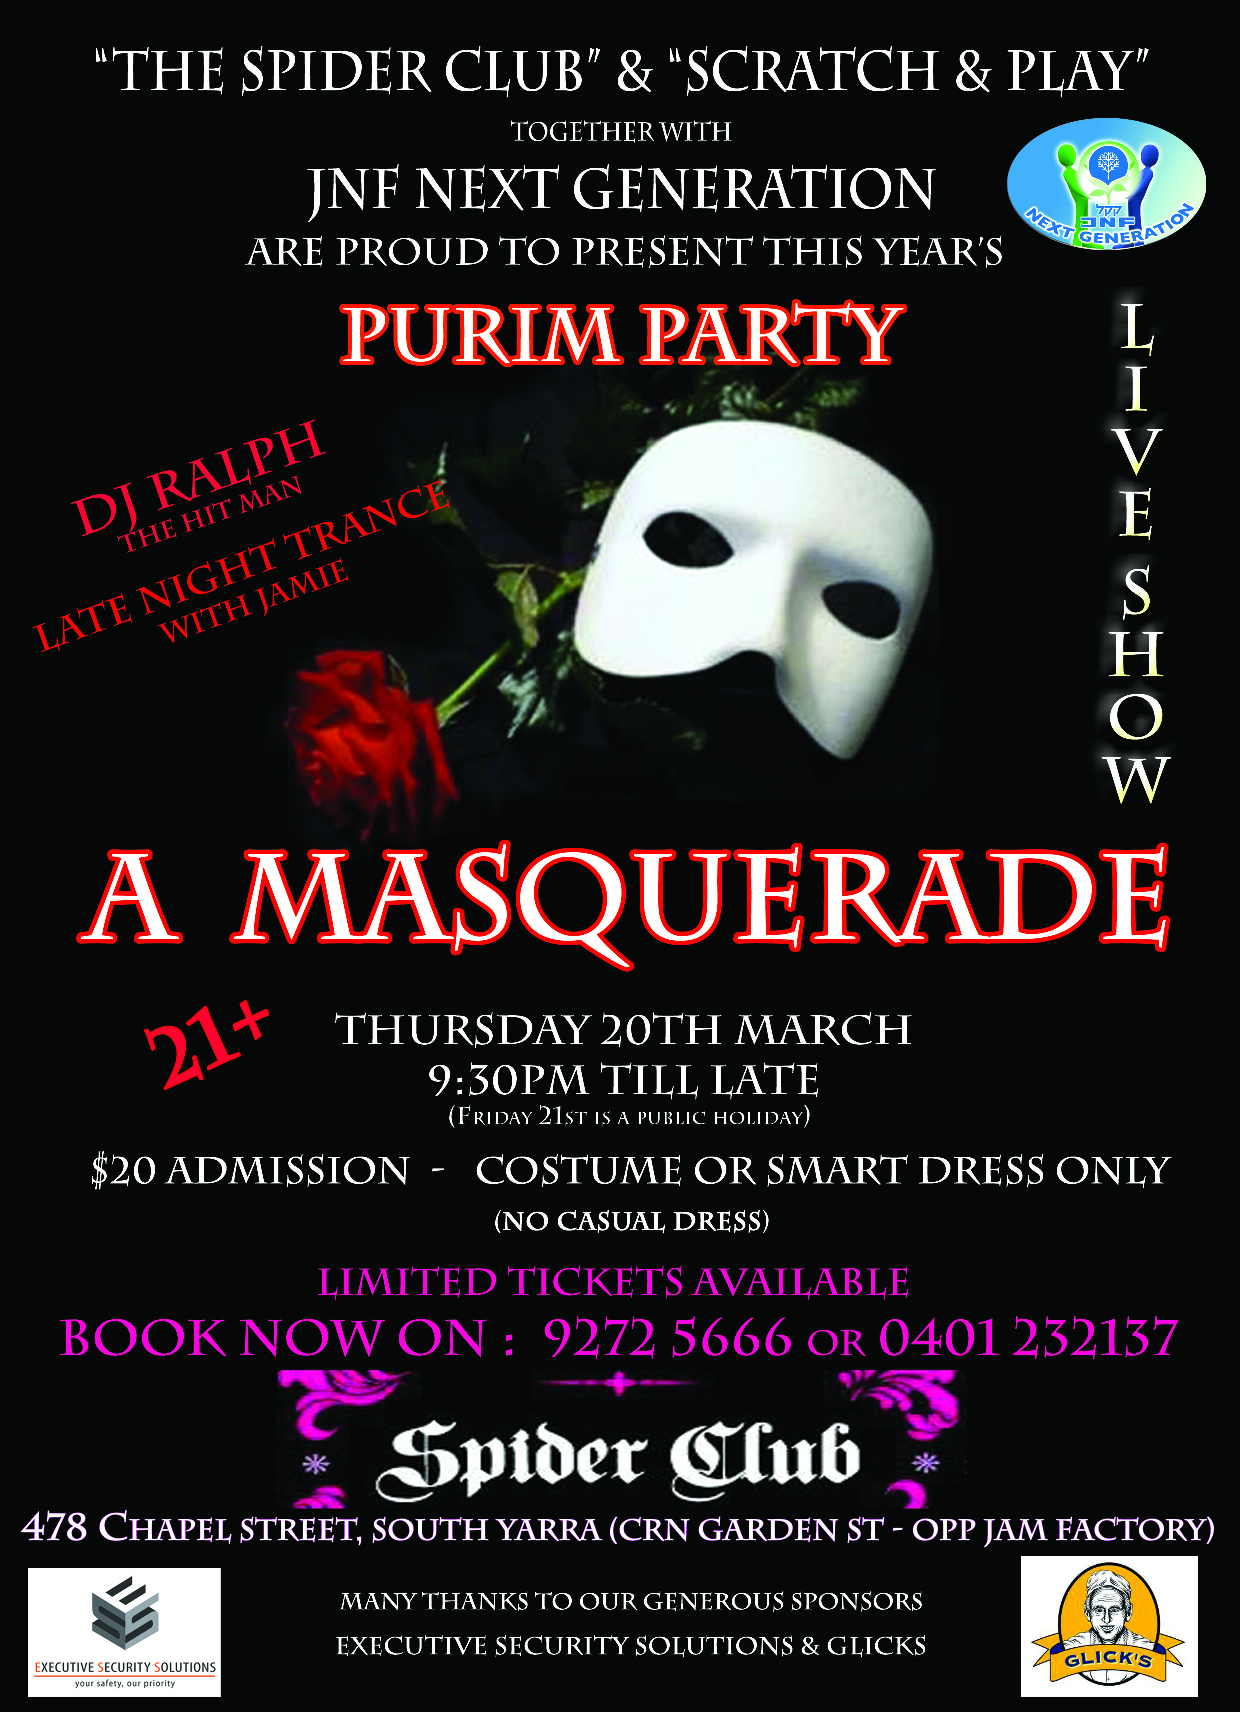 Young Jnf Purim Party